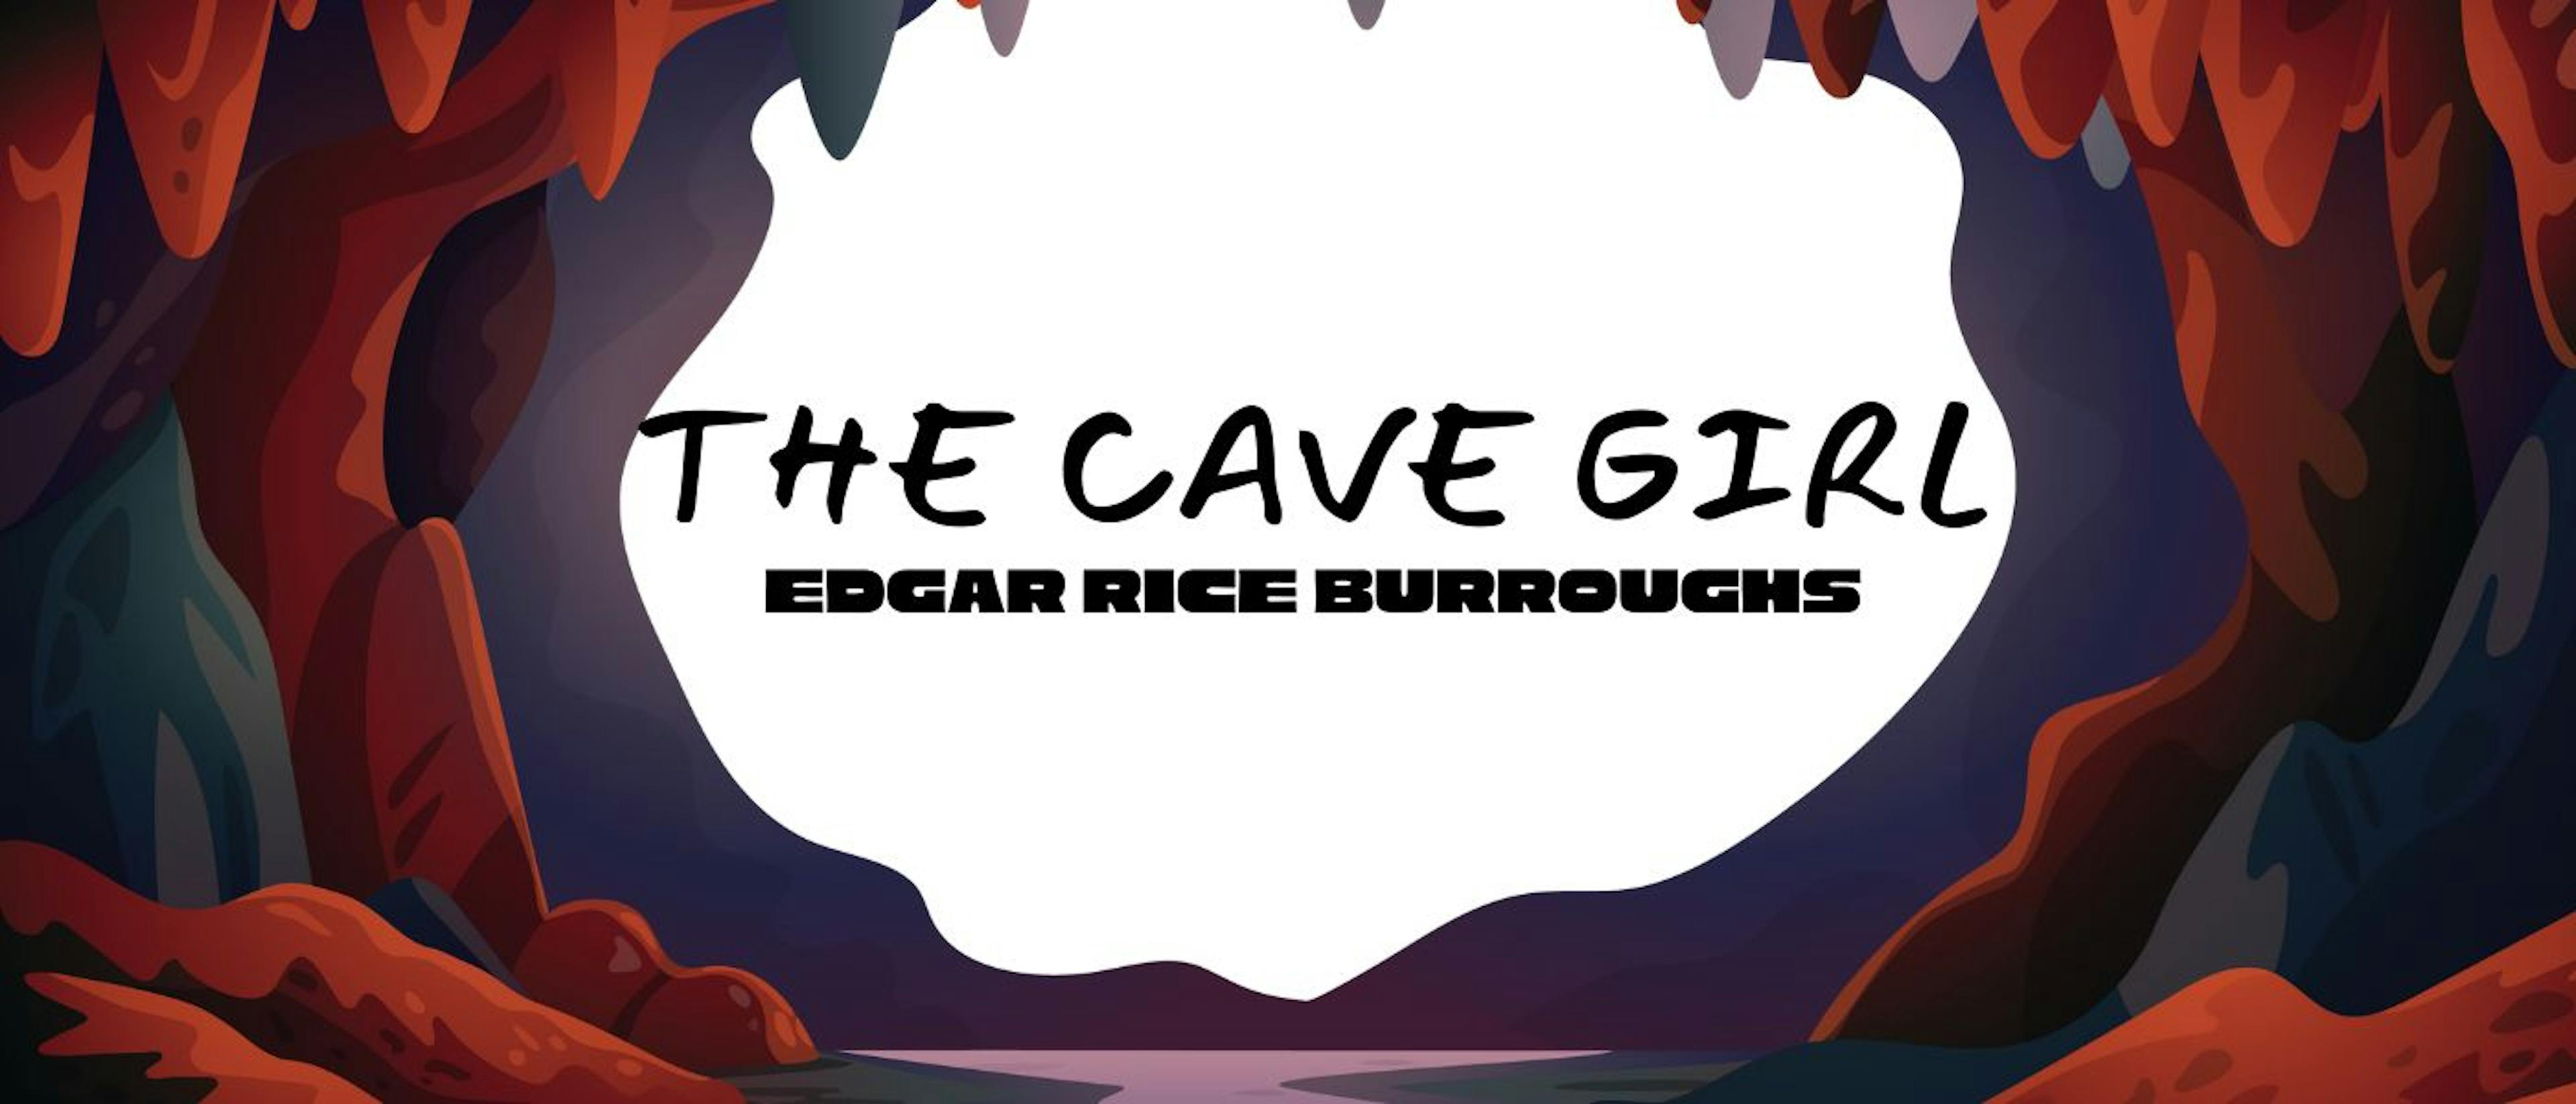 featured image - The Cave Girl by Edgar Rice Burroughs - Table of Links